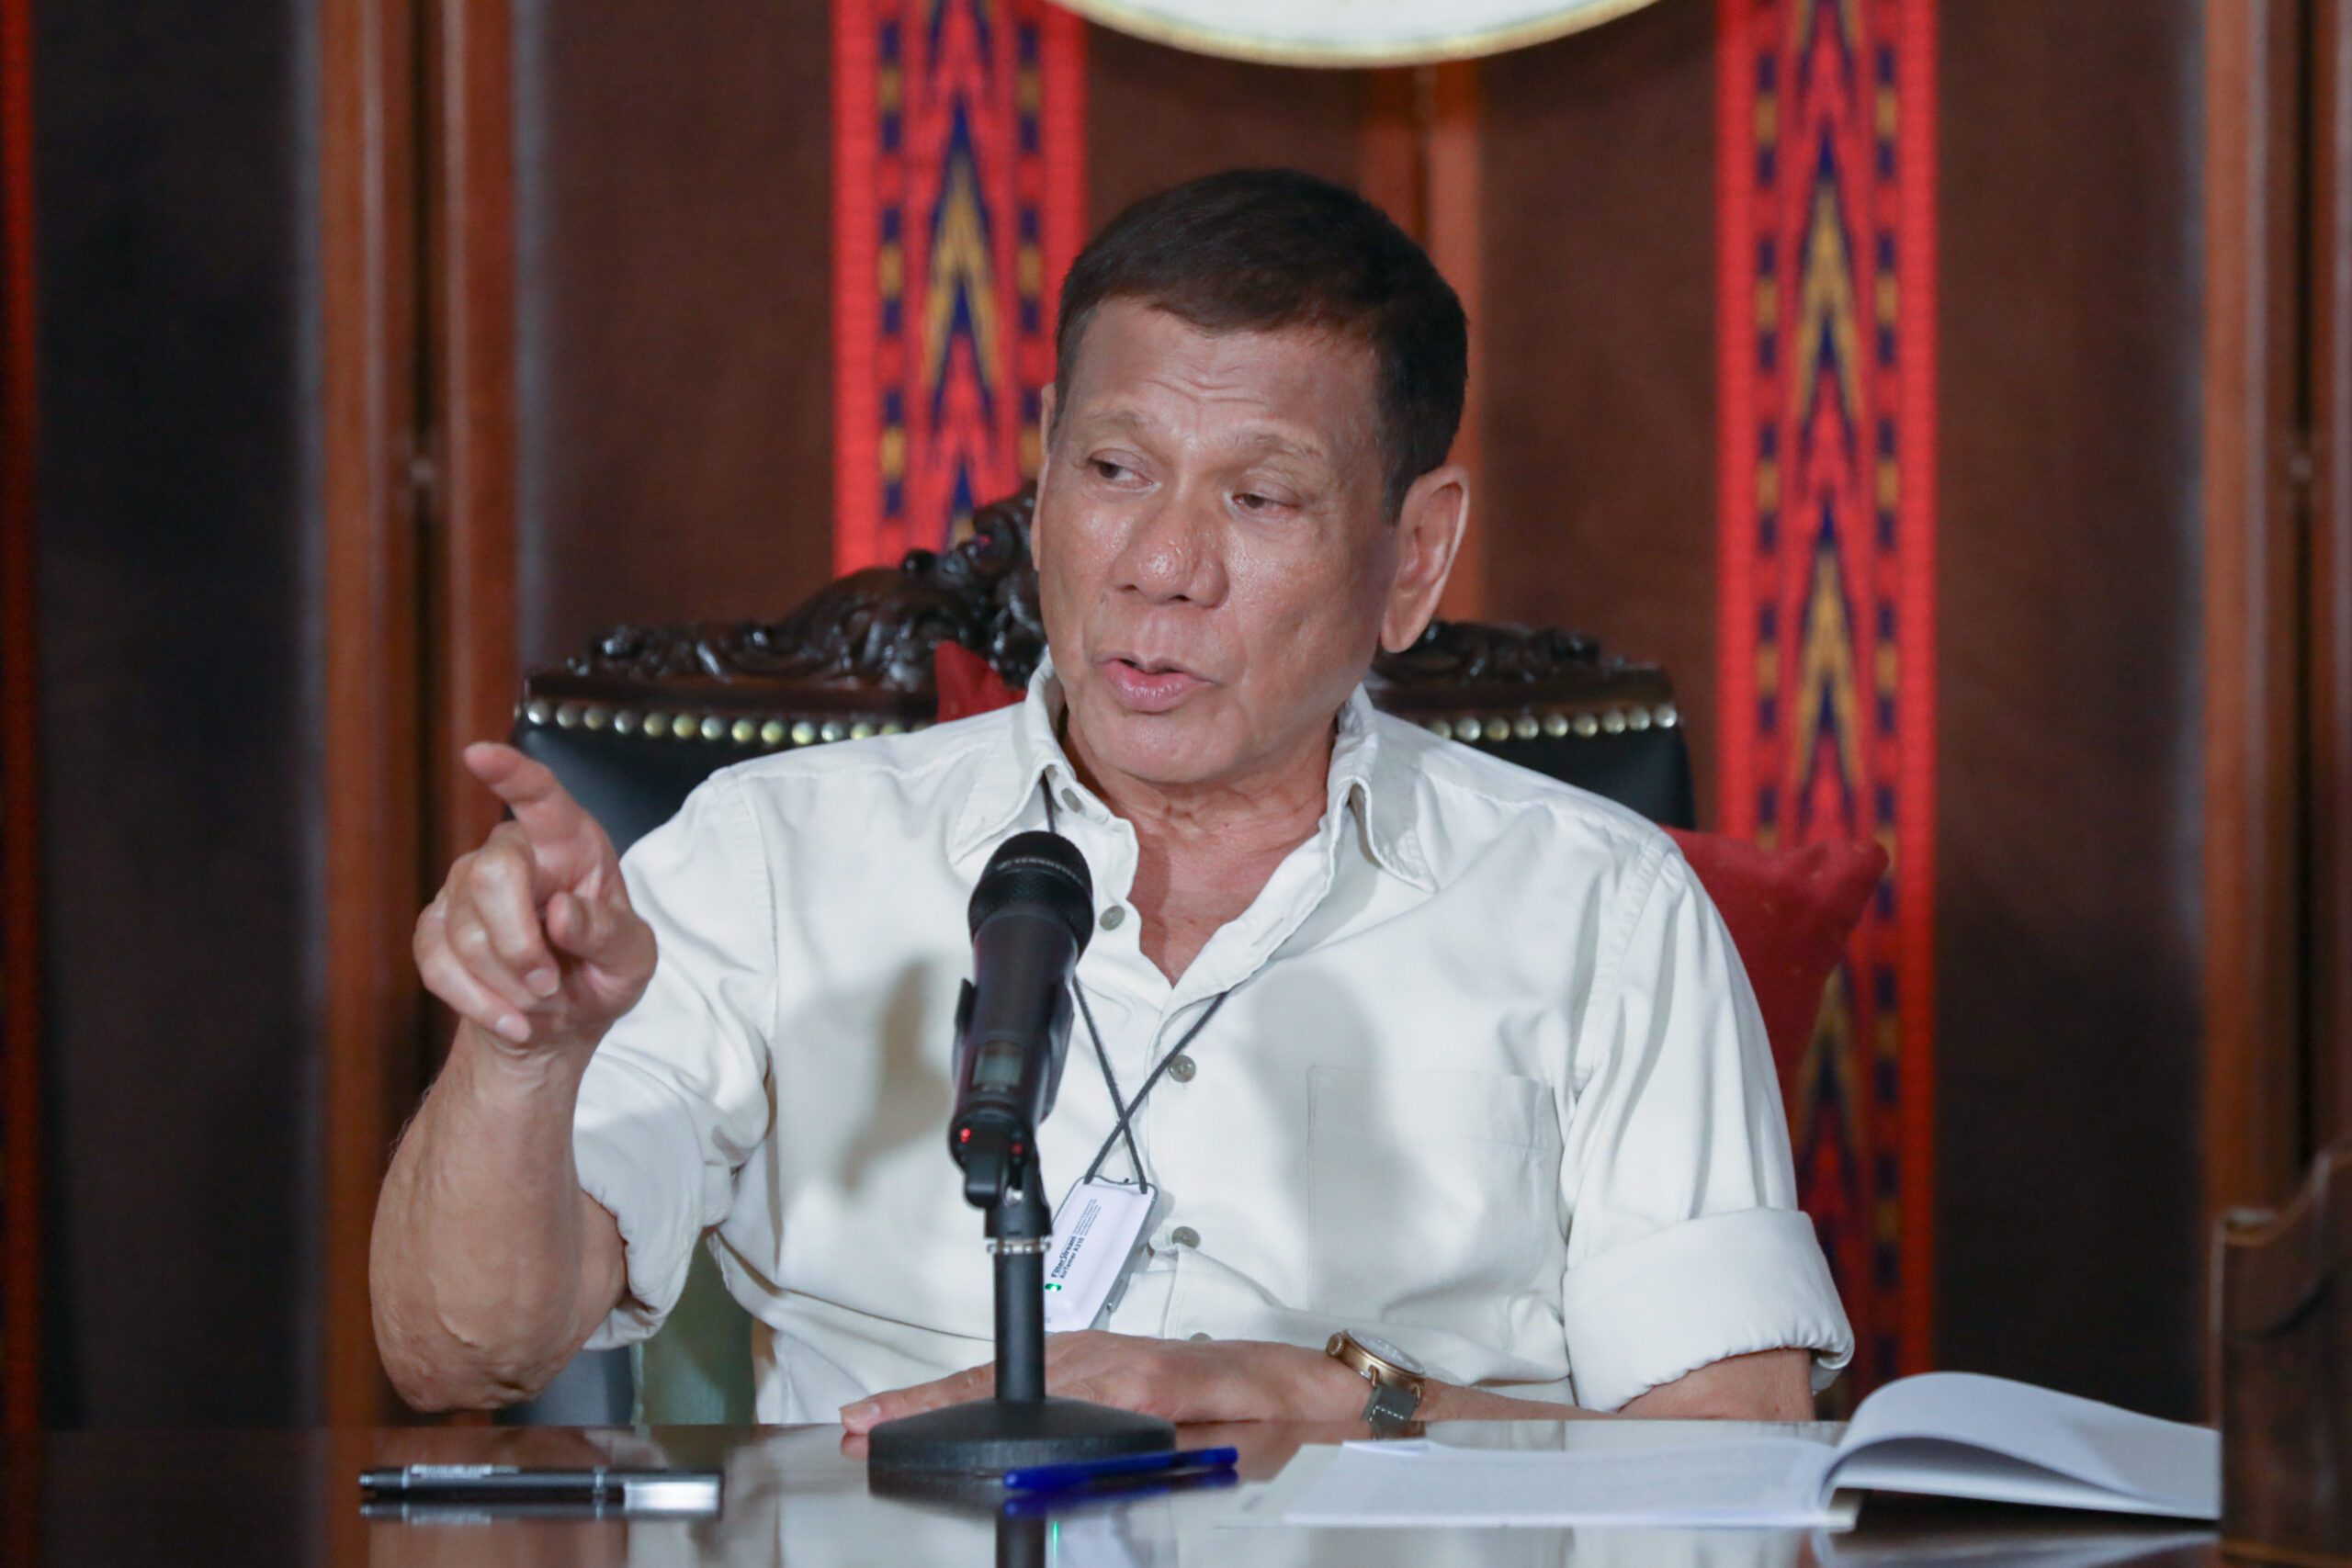 Amid coronavirus outbreak, Duterte lashes out at Chel Diokno for ‘causing disorder’